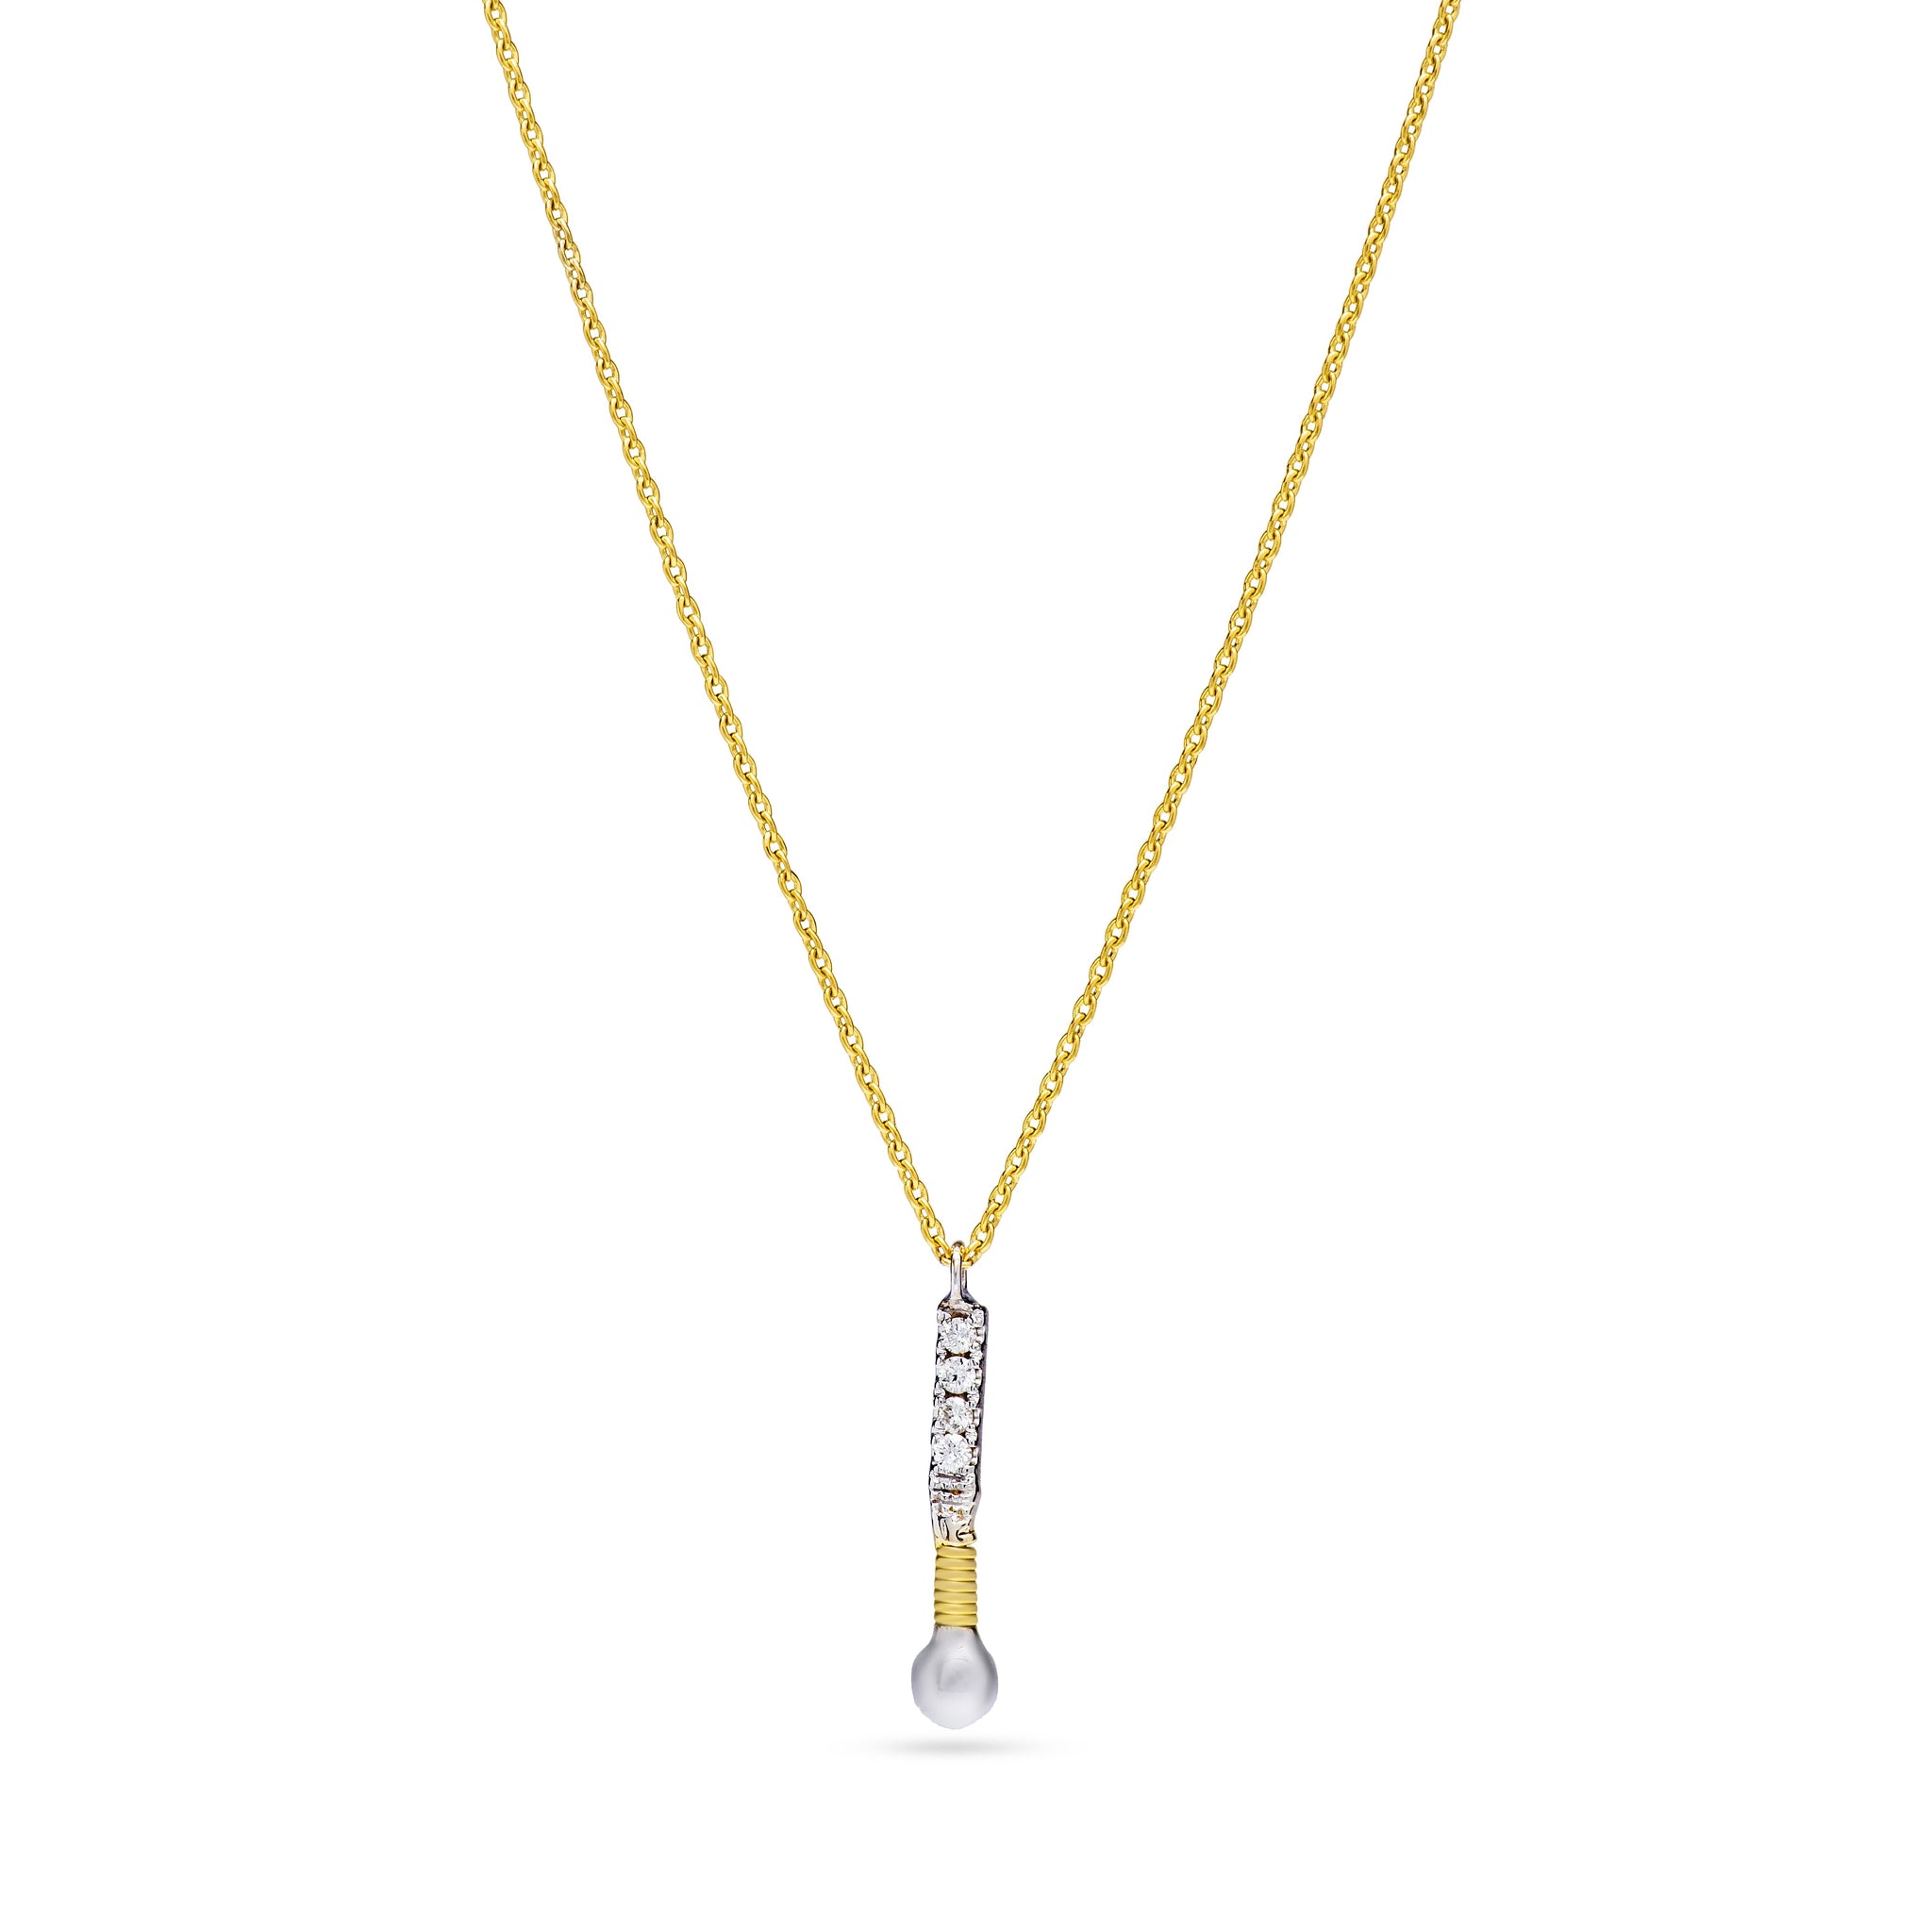 Letter I outstanding Diamond Necklace in Yellow 18 K Gold - MB2711/1 &  Weight of 1.75